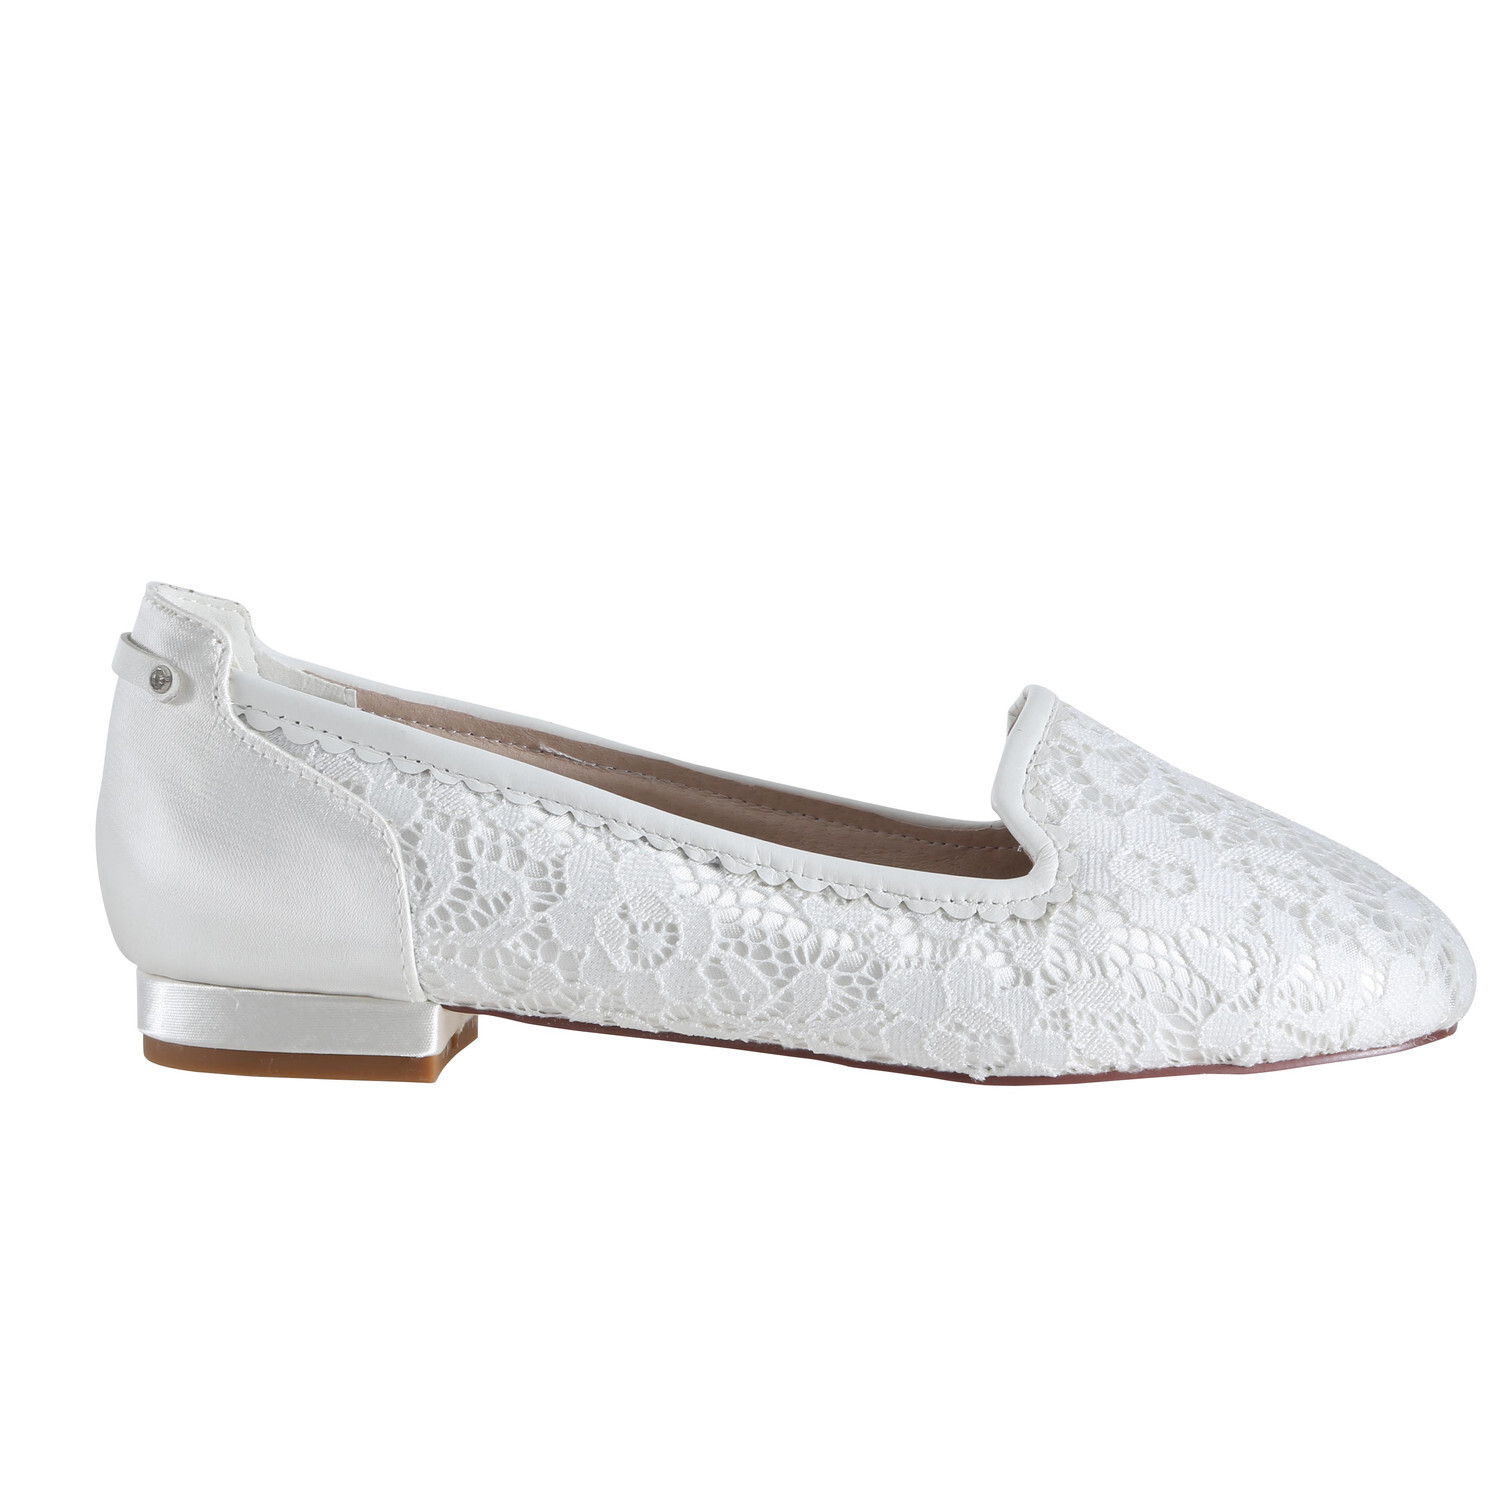 Alice Wedding Shoes from The Perfect Bridal Company - hitched.co.uk